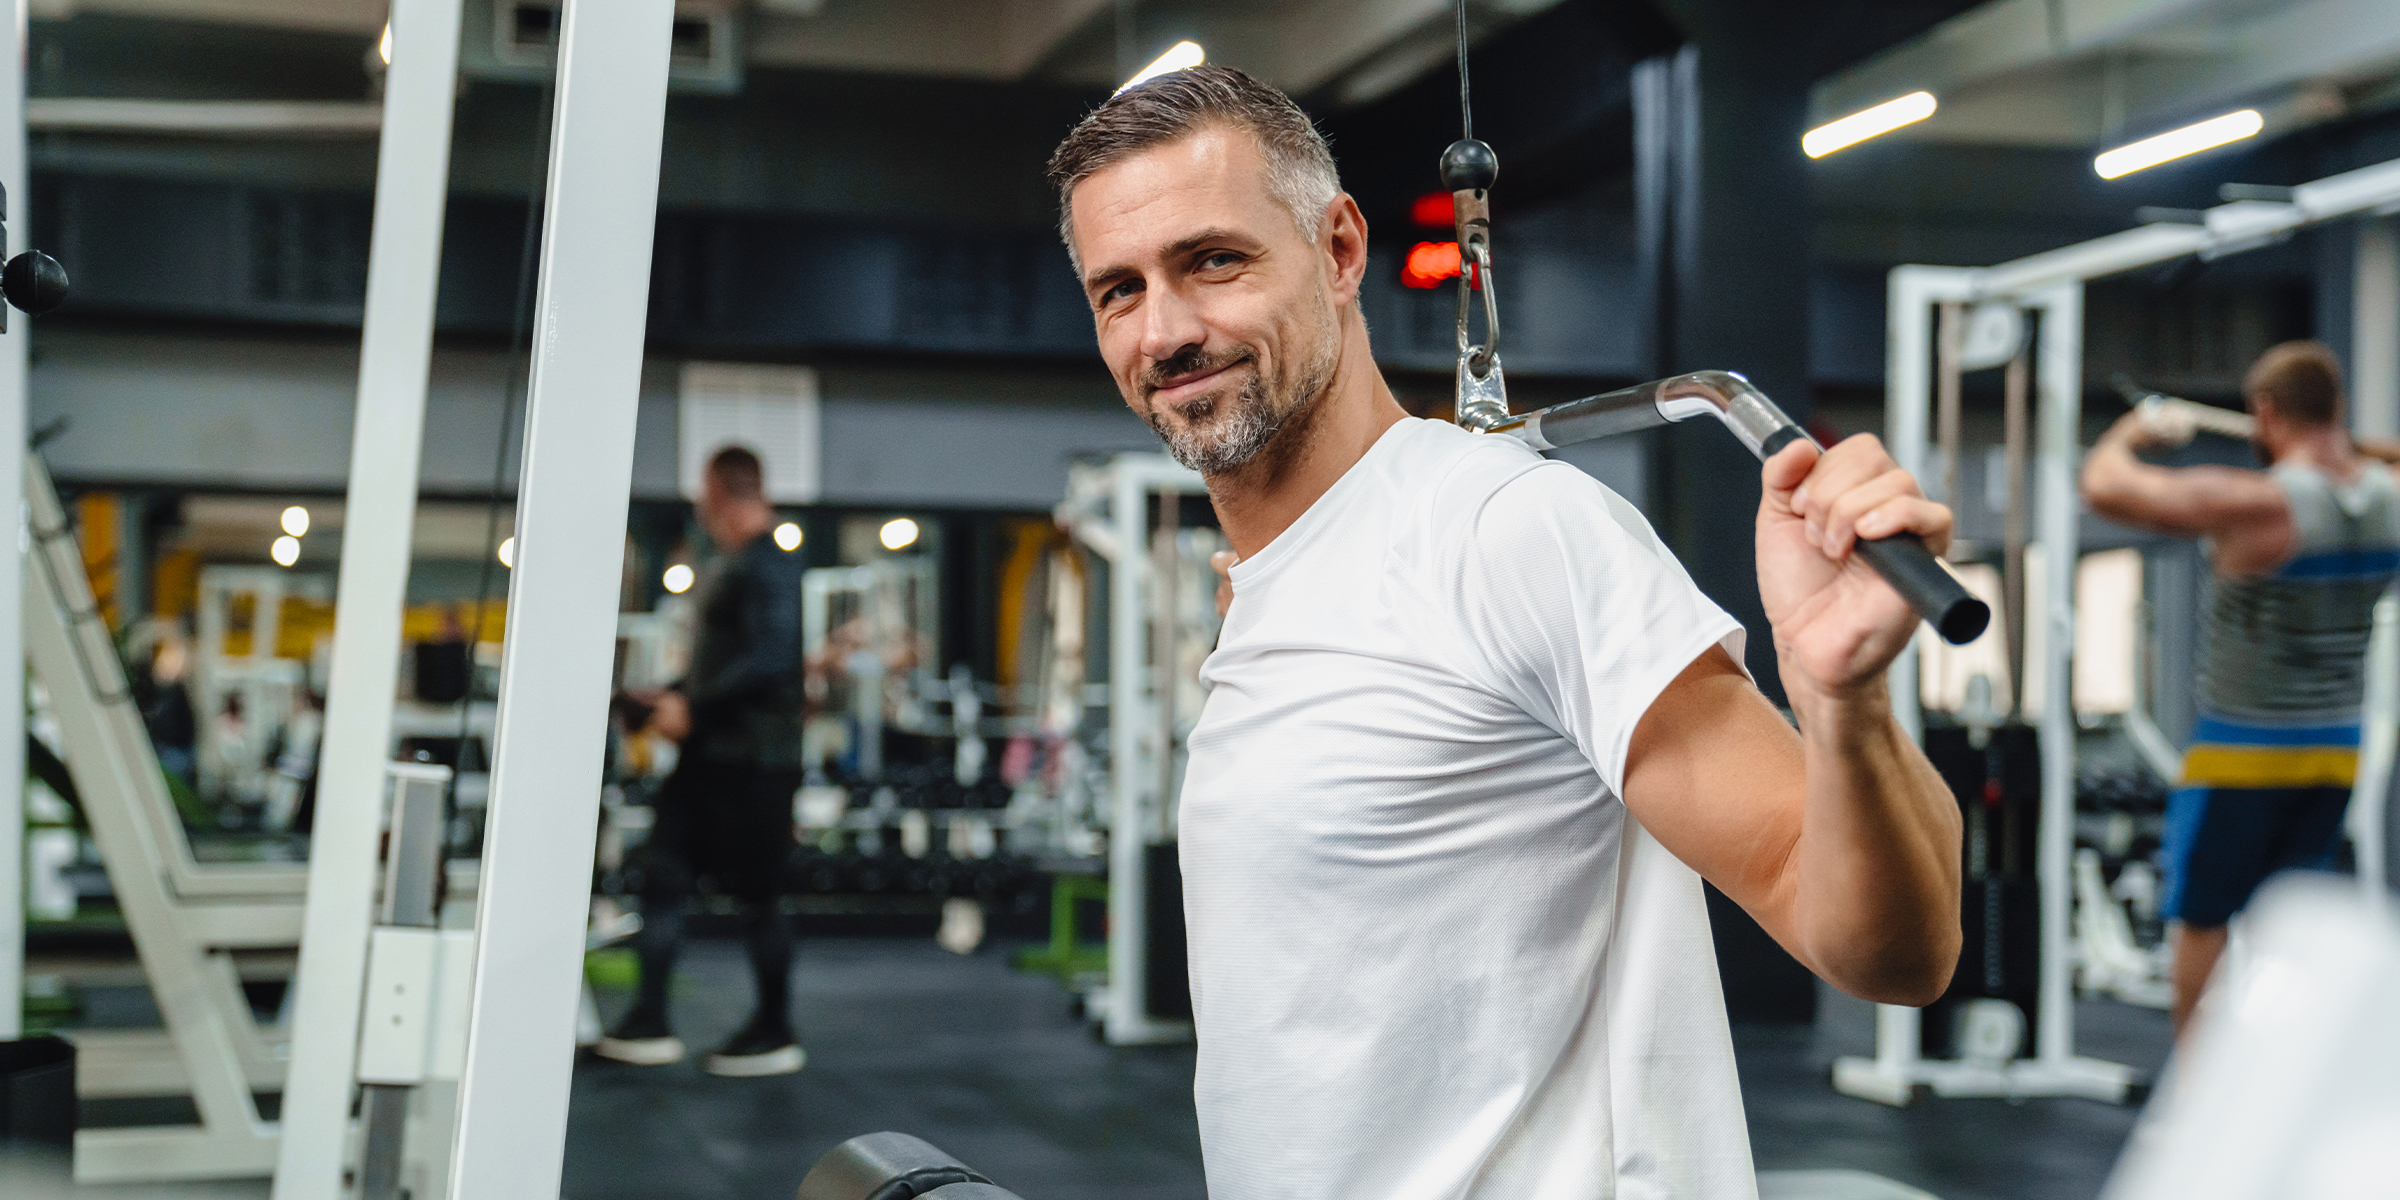 Man working out in a gym | Source: Shutterstock